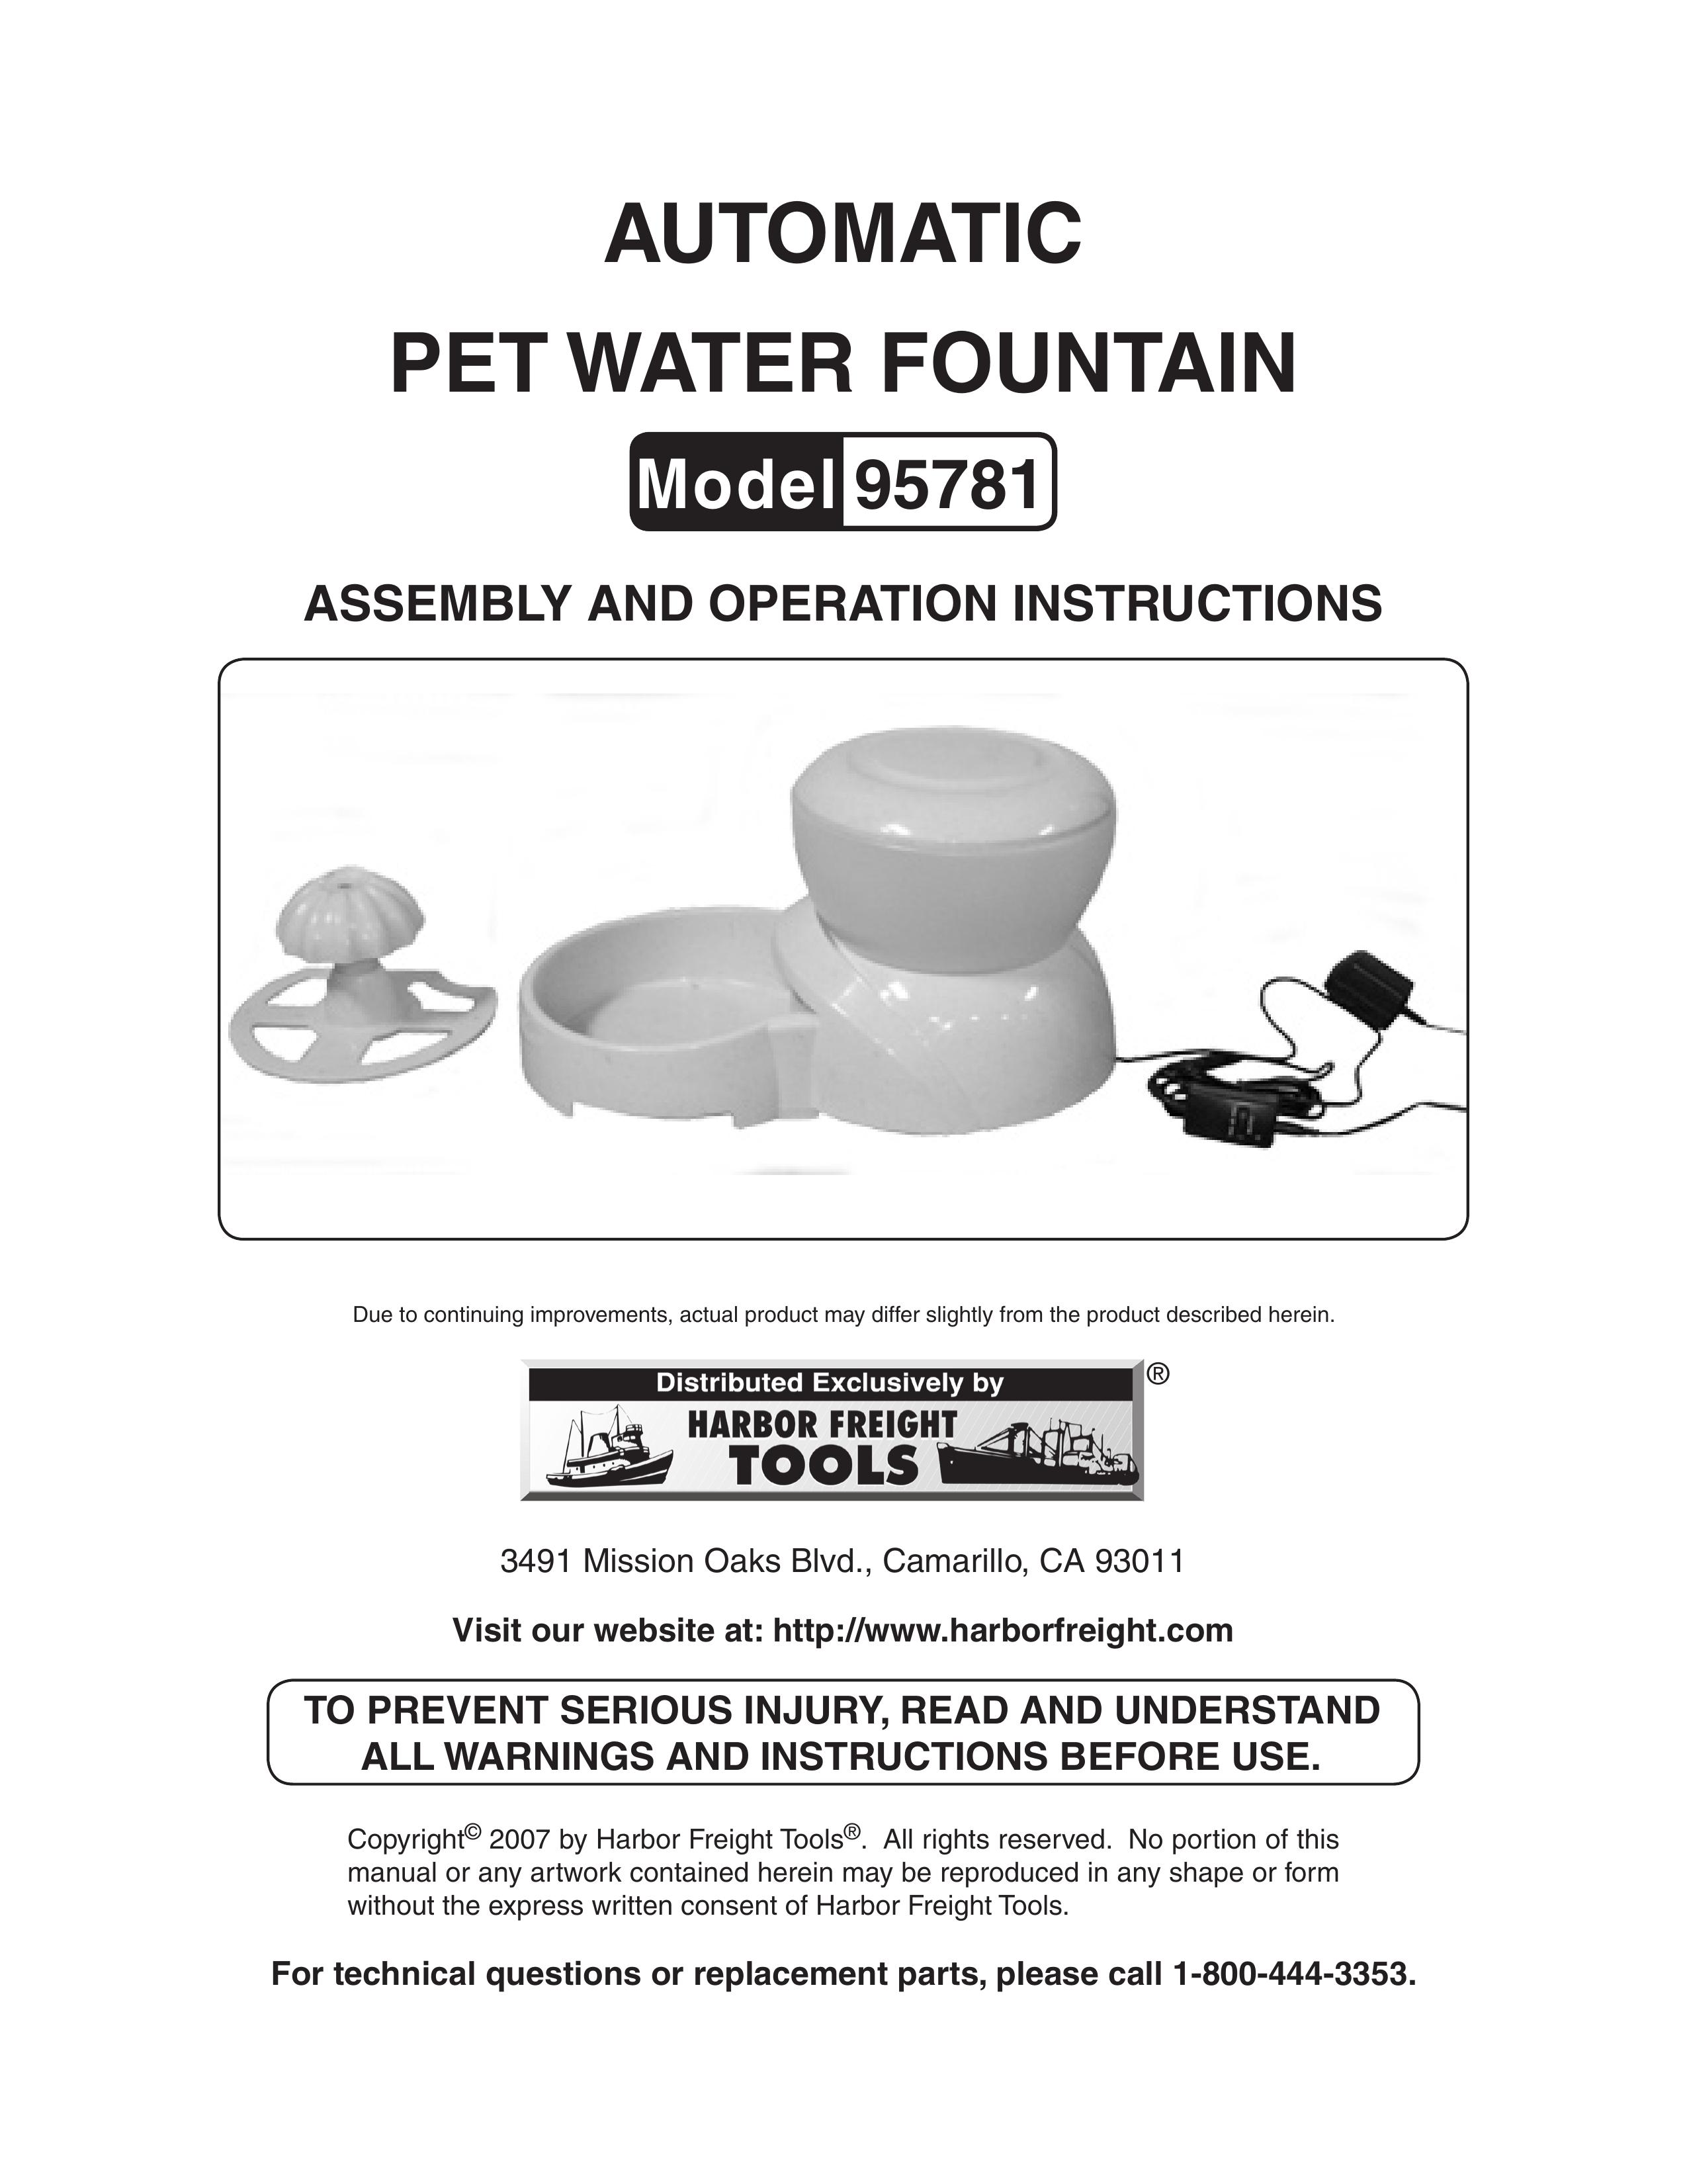 Harbor Freight Tools 95781 Outdoor Fountain User Manual